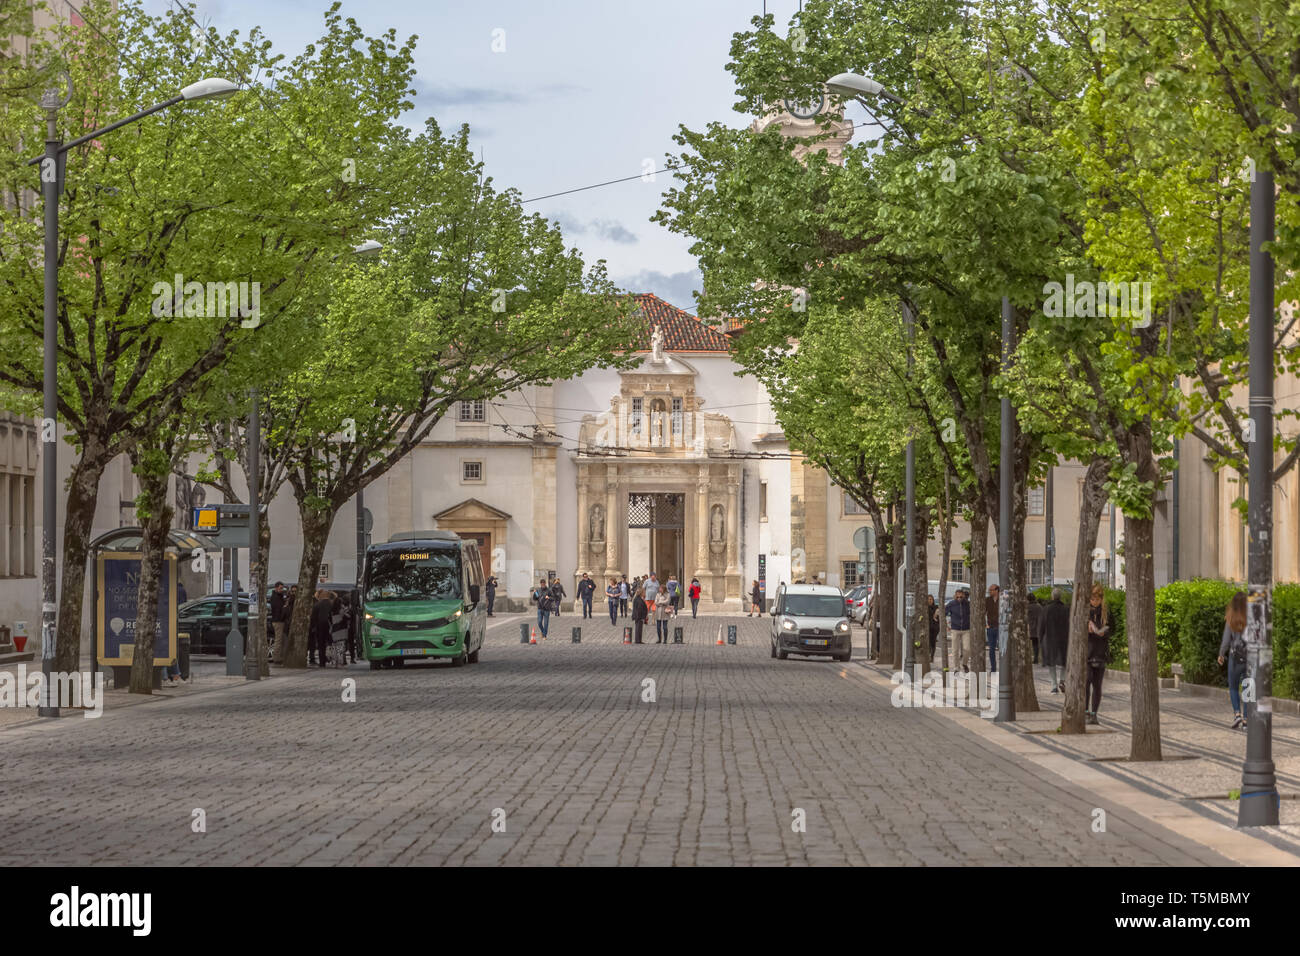 Coimbra / Portugal - 04 04 2019 : View of a plaza, with iron gate of the University of Coimbra, classic architectural structure with masonry, with peo Stock Photo